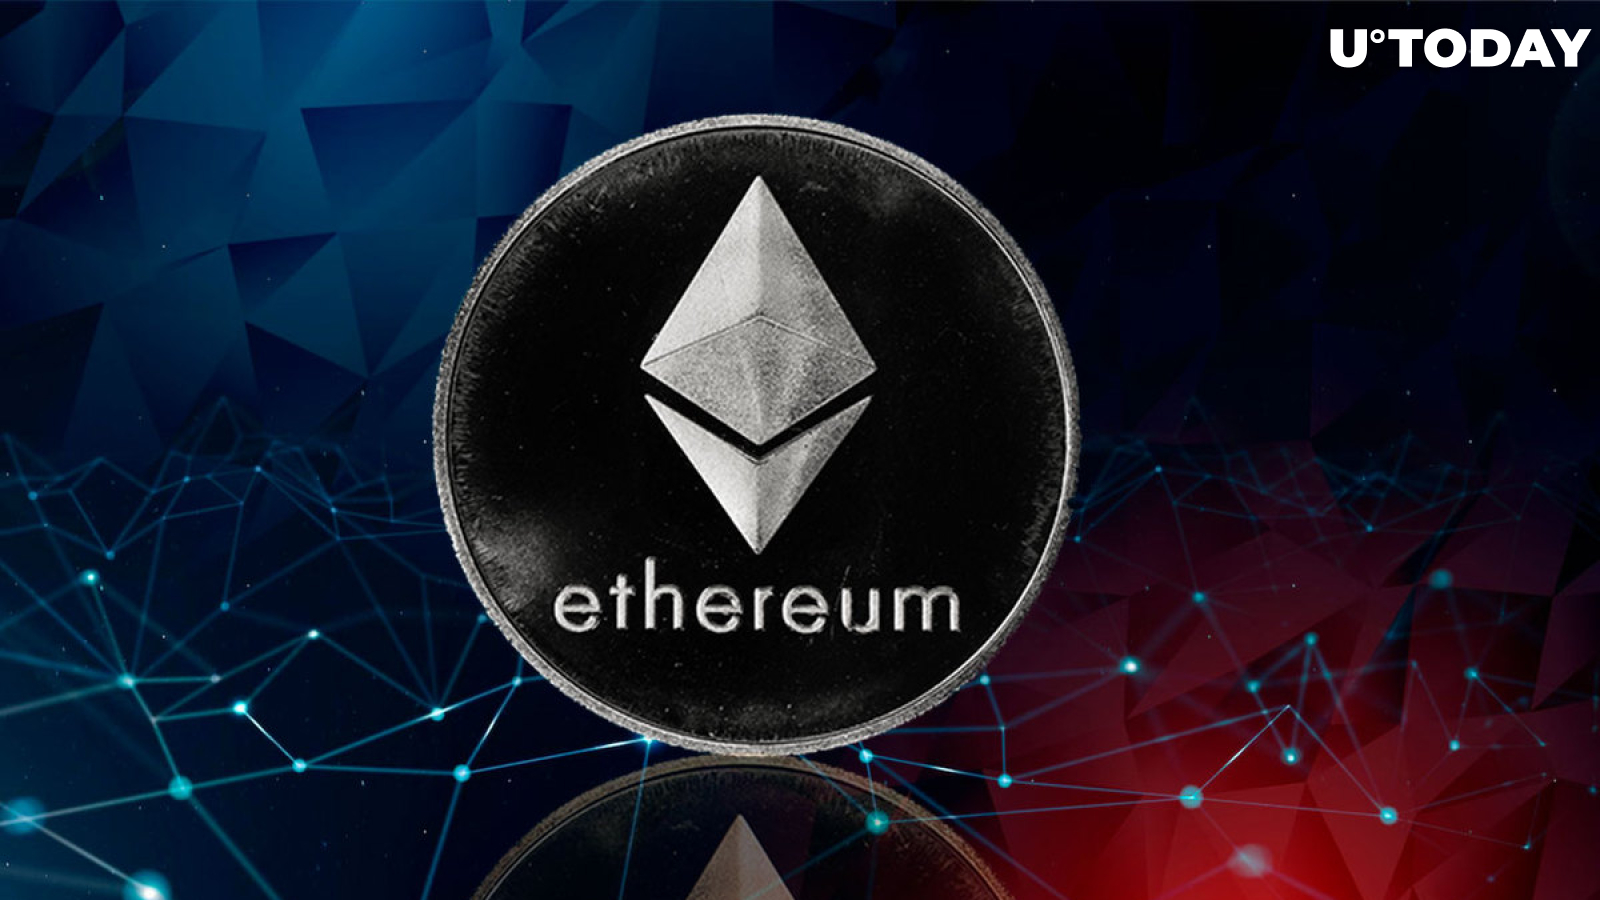 Ethereum Reaches New Resistance Line: Here's What to Expect